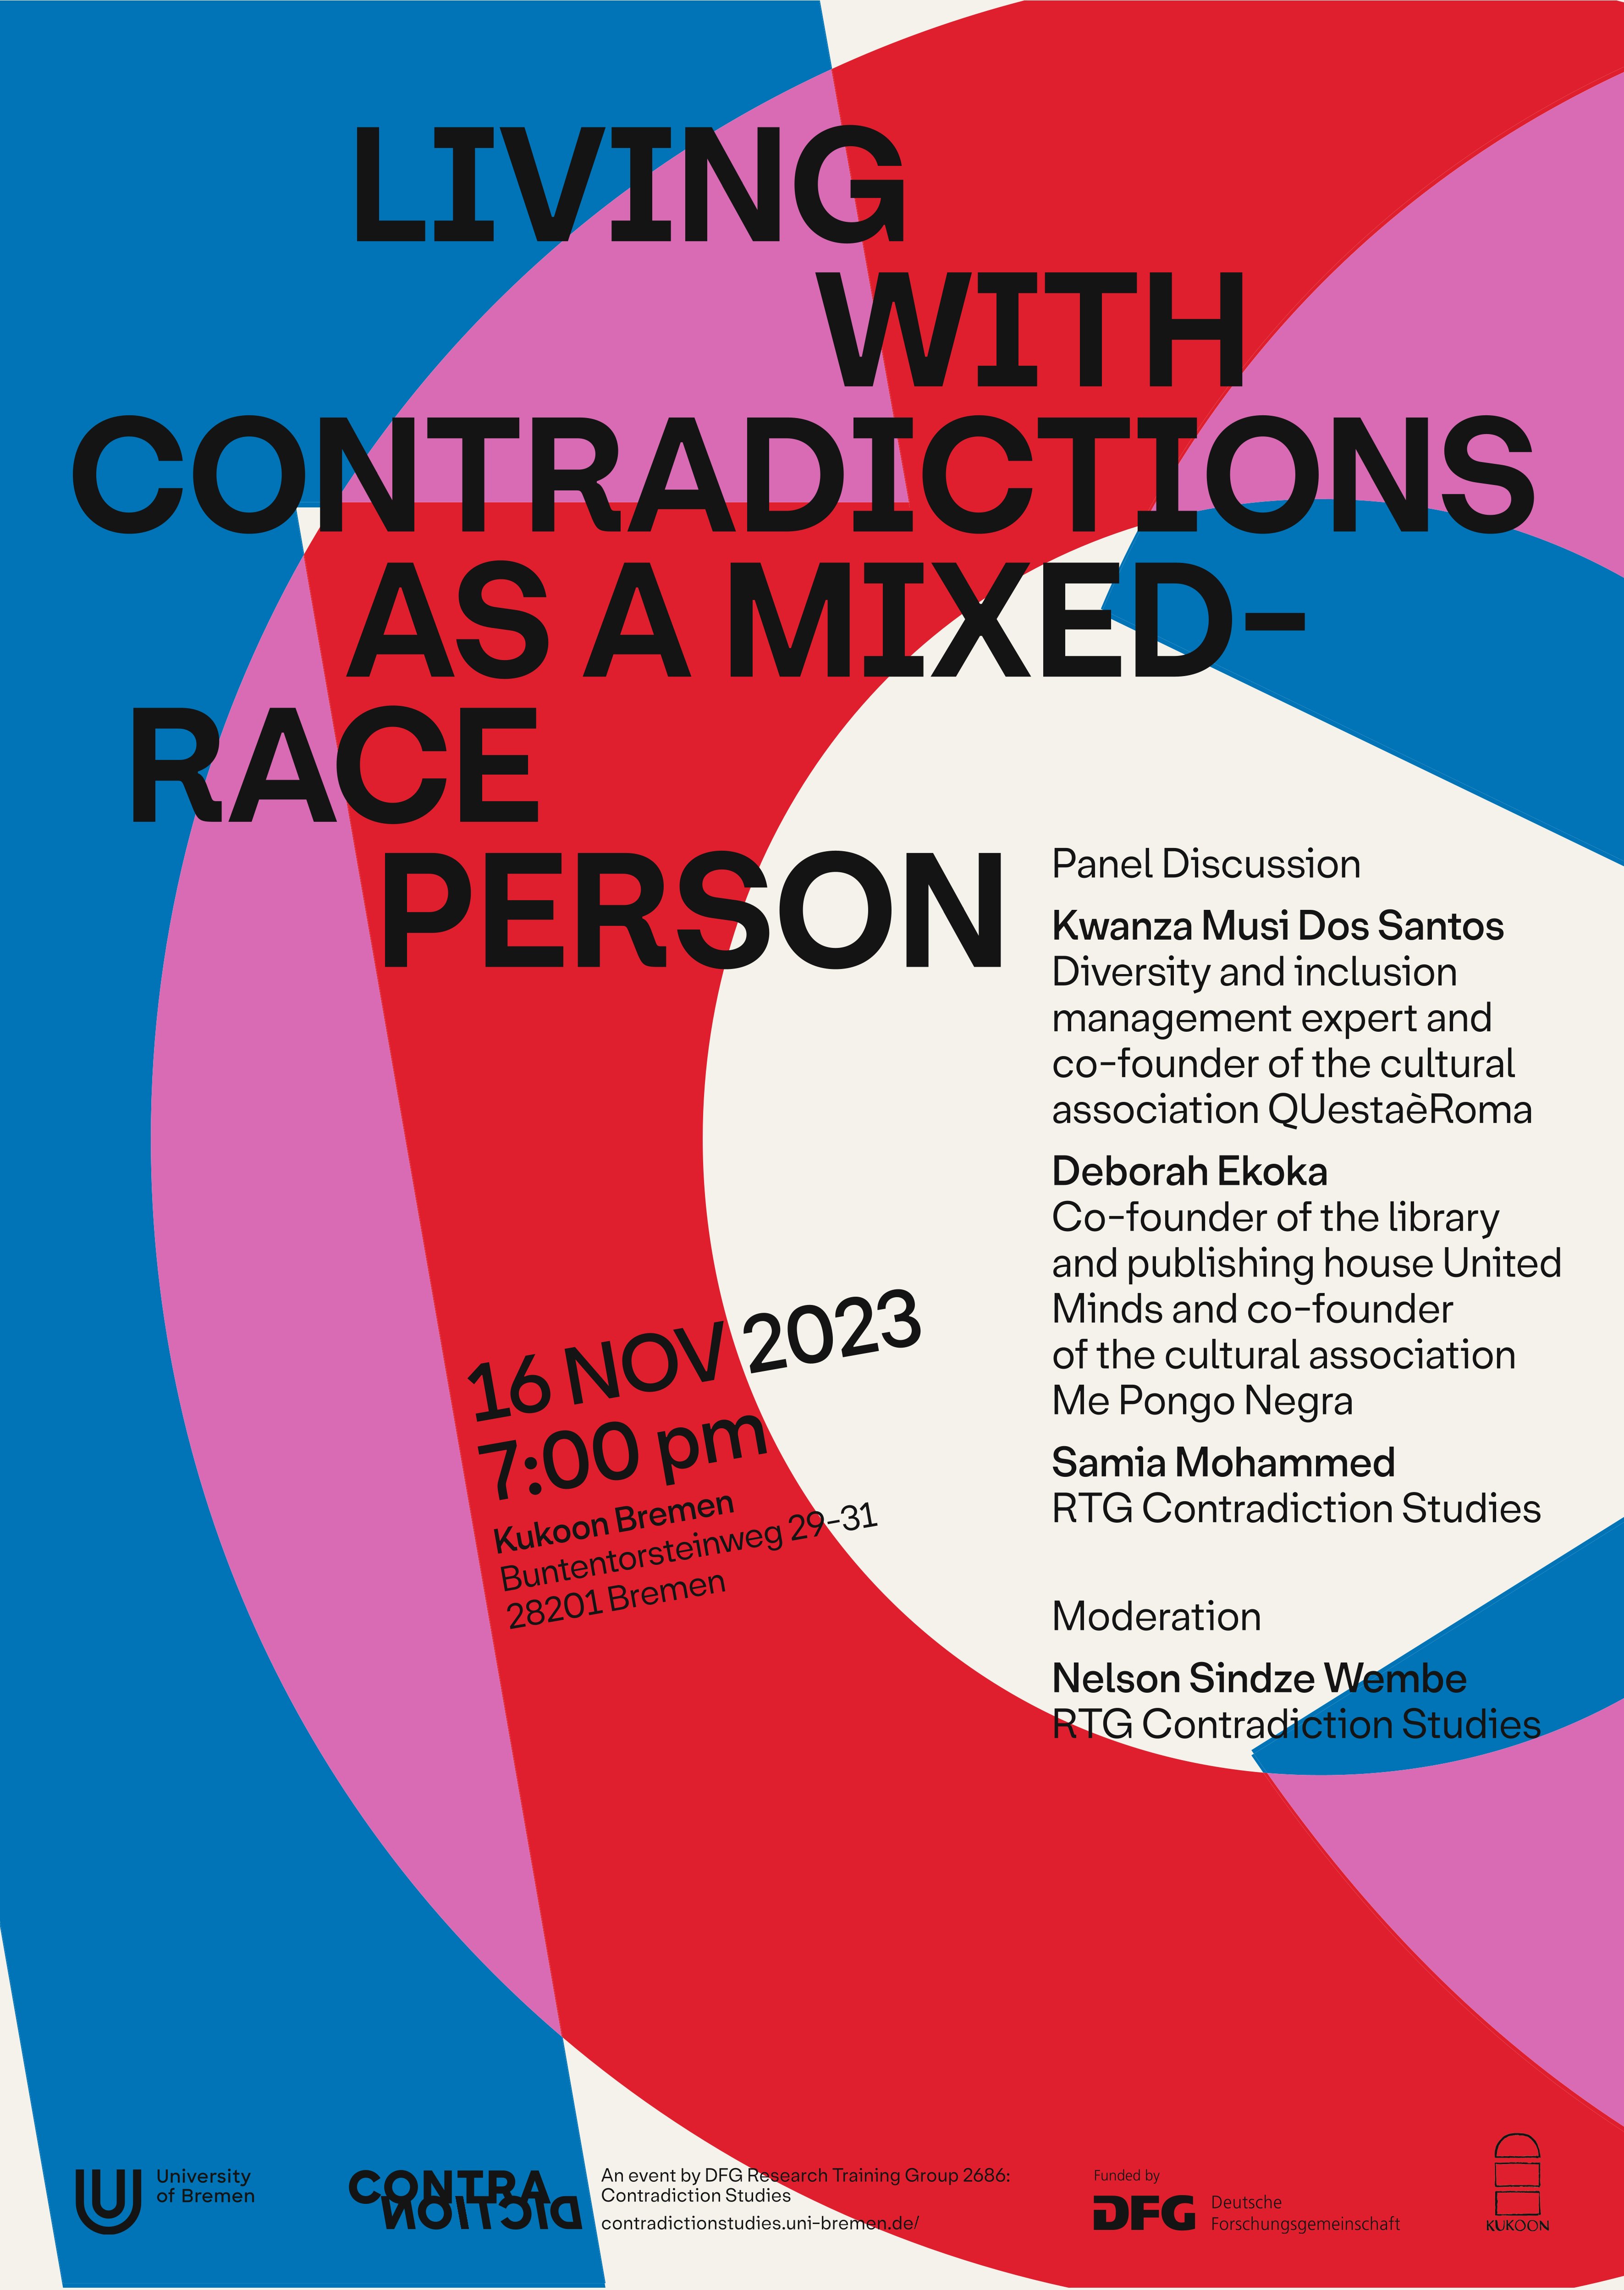 Poster advertising the panel discussion living with contradictions as a mixed-race person.